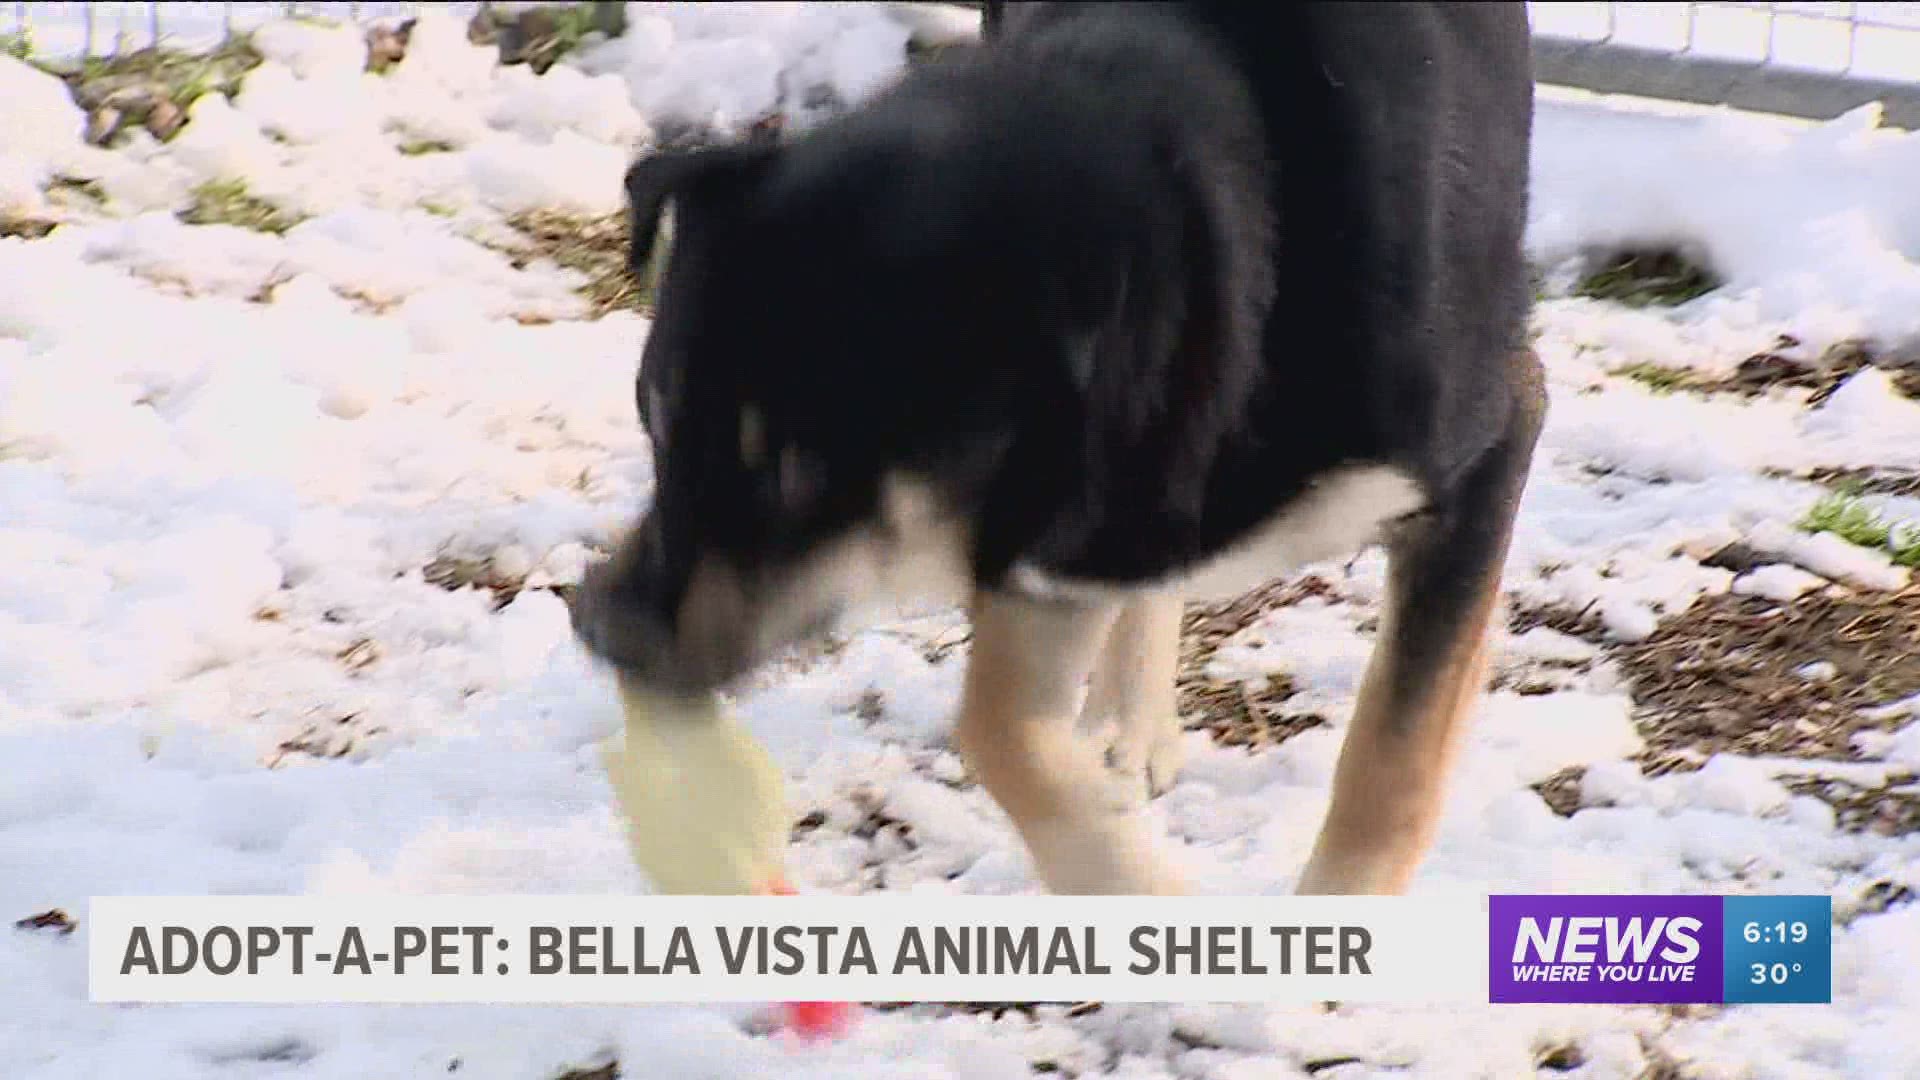 Husky-Rottweiler mix Champ and sisters Faith and Hope are waiting for their forever families at the Bella Vista Animal Shelter. https://bit.ly/34kiX8O